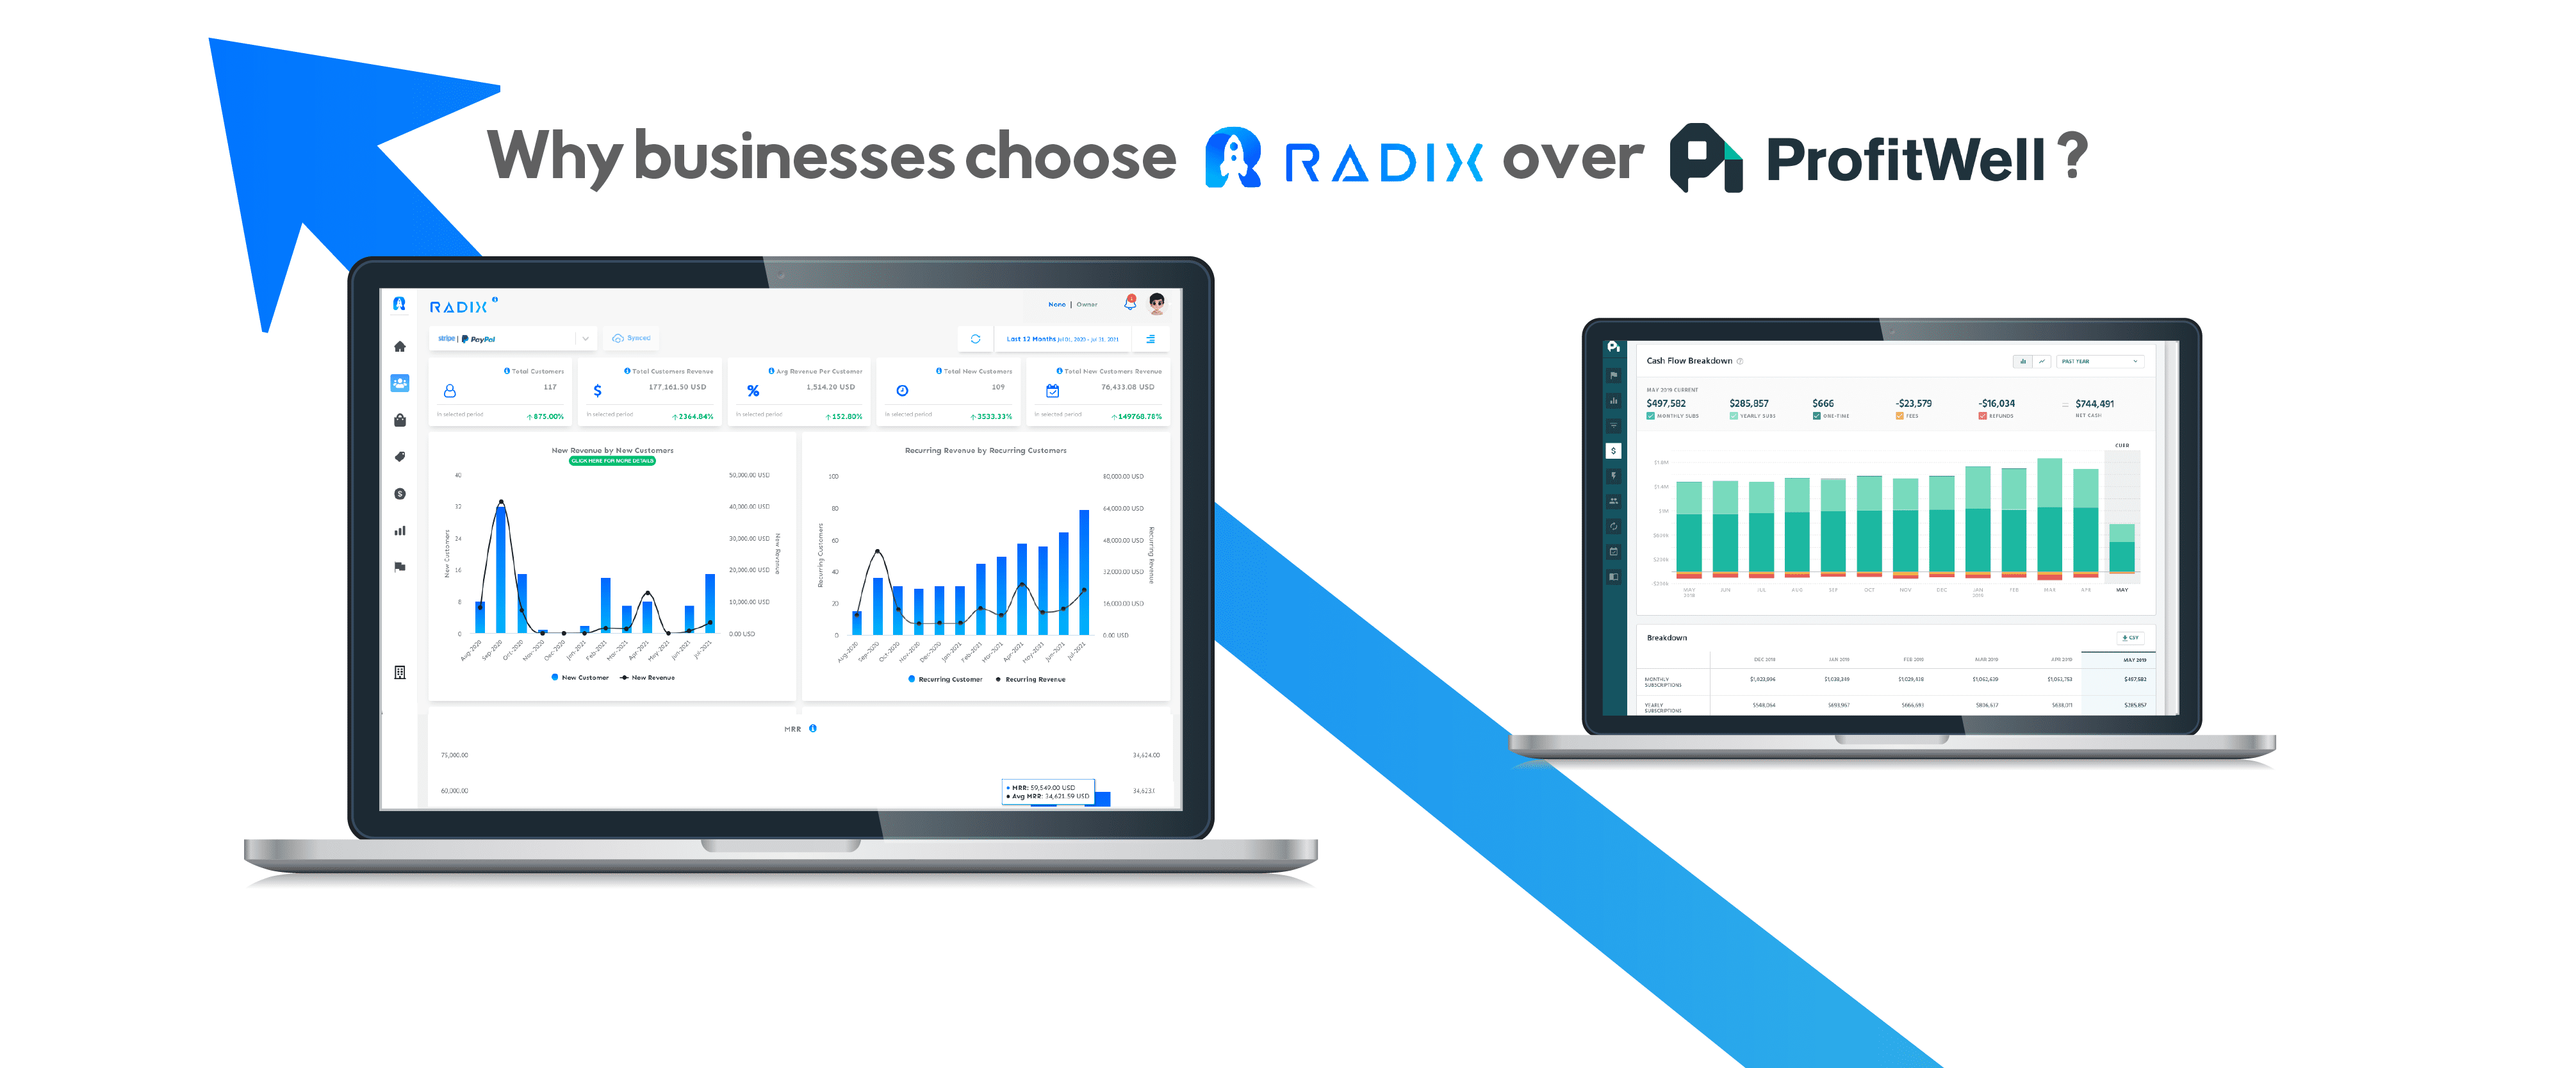 Why businesses choose Radix over ProfitWell?